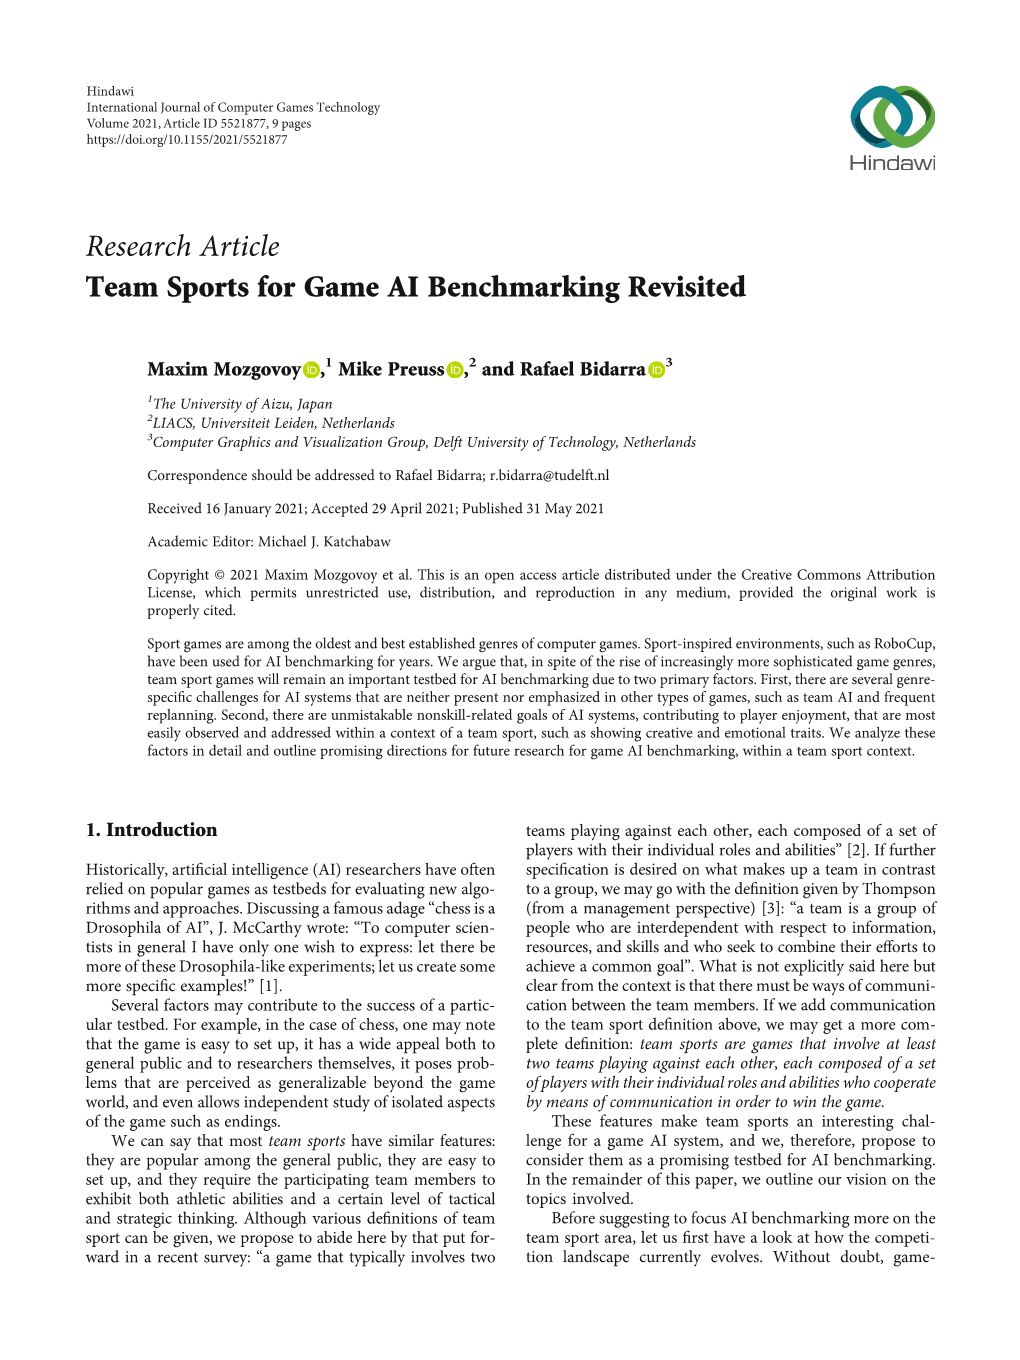 Team Sports for Game AI Benchmarking Revisited